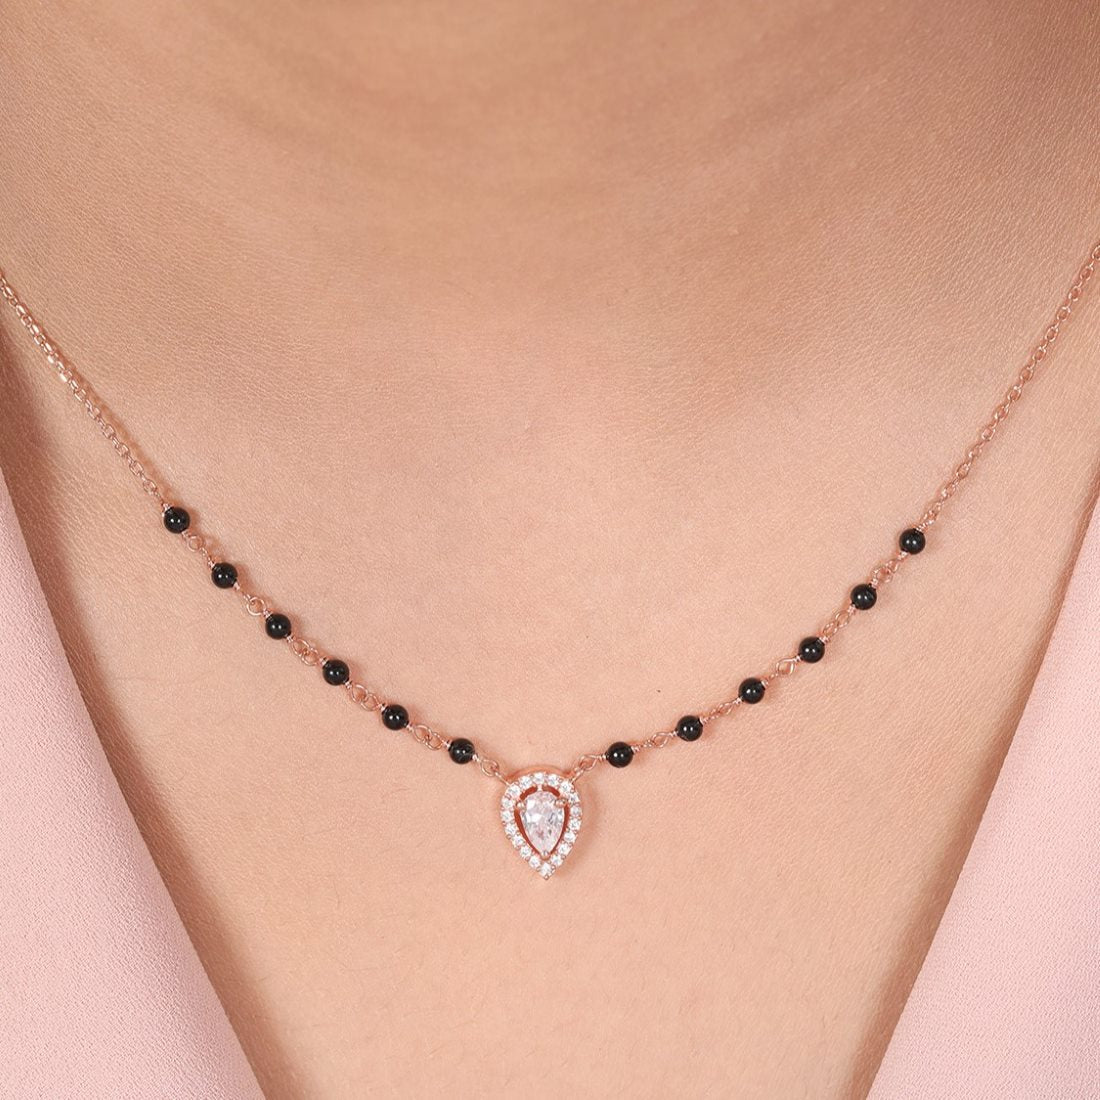 Teardrop Serenity Rose Gold-Plated 925 Sterling Silver Mangalsutra